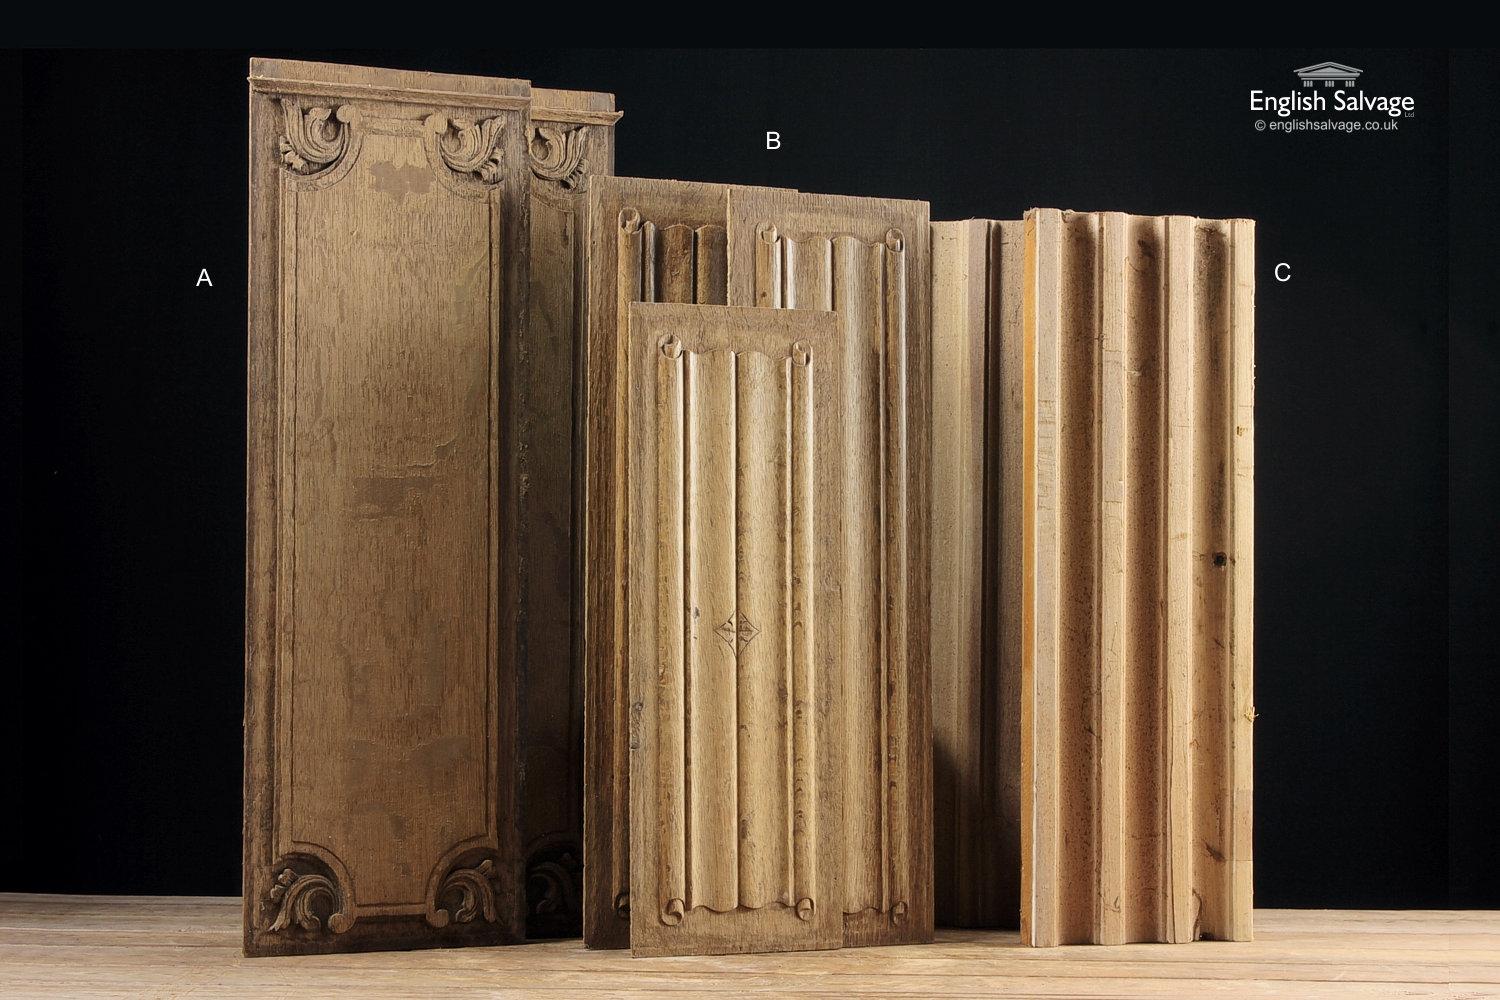 Seven pieces miscellaneous oak carved panels, (linen fold, ridged and decorative panels).
A) 2 Decorative panels embellished with leaves - 22cm W x 65cm H - Sold
B) 3 Linen fold panels - 2 x 17cm W x 58cm H / the other 17cm W x 48cm H - Sold
C) 2